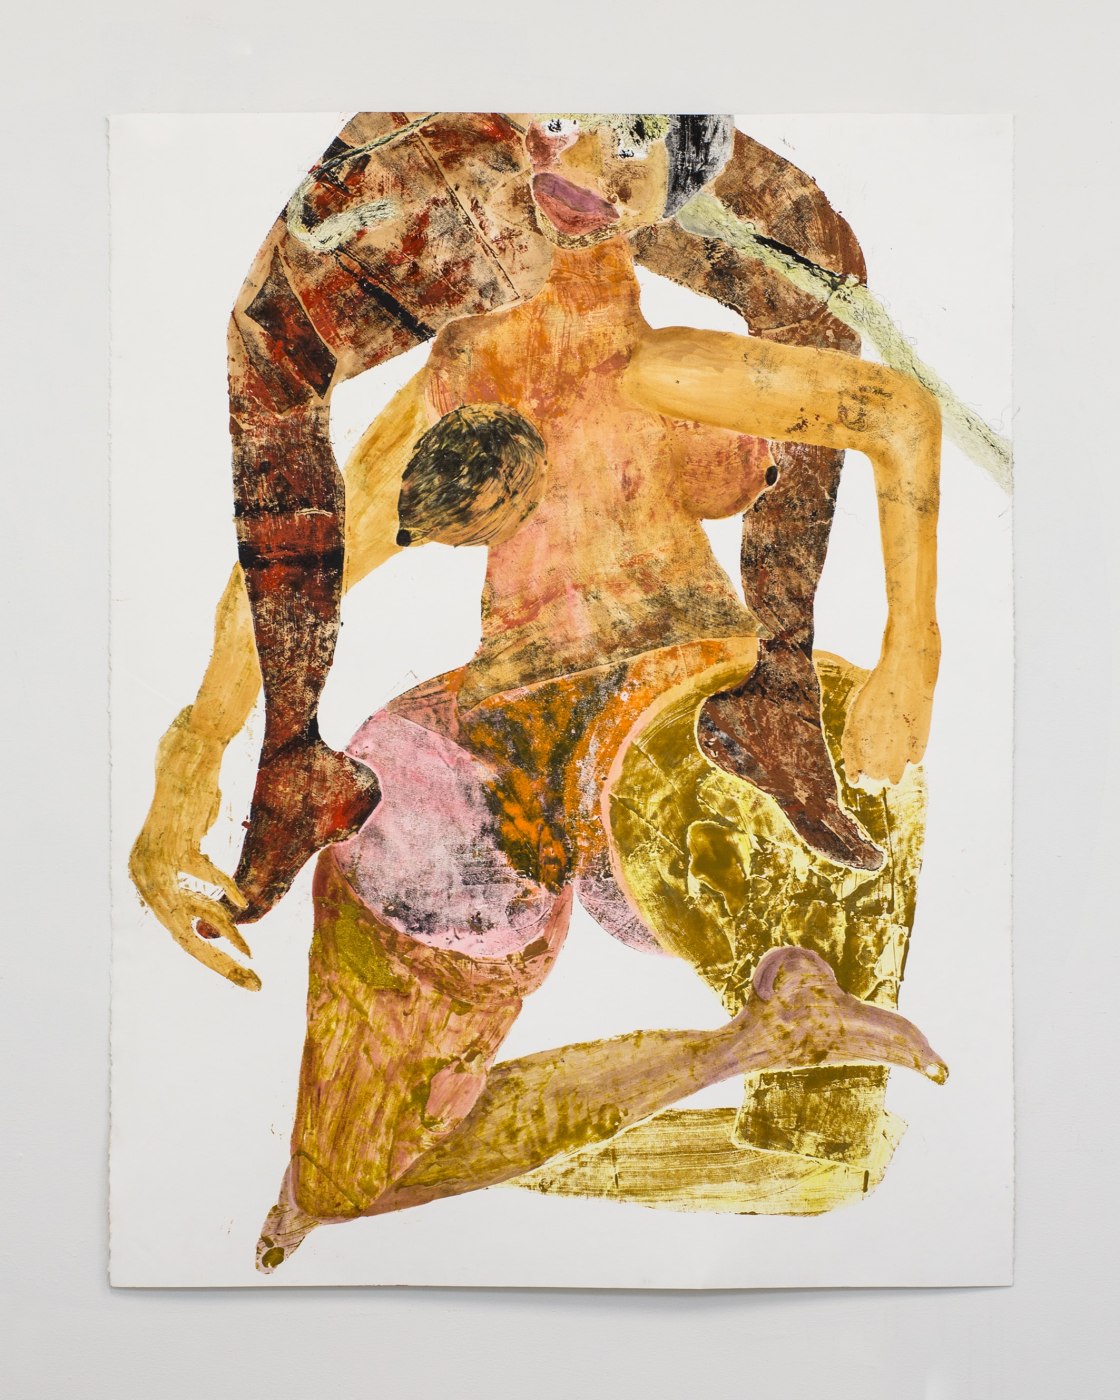 TSCHABALALA SELF

Entwined

2014

Oil and gouache on paper

Sheet 127 x 96.5 cm / 50 x 38 in

Frame 132.5 x 104.5 cm / 52 1/8 x 41 1/8 in

SELF 46888